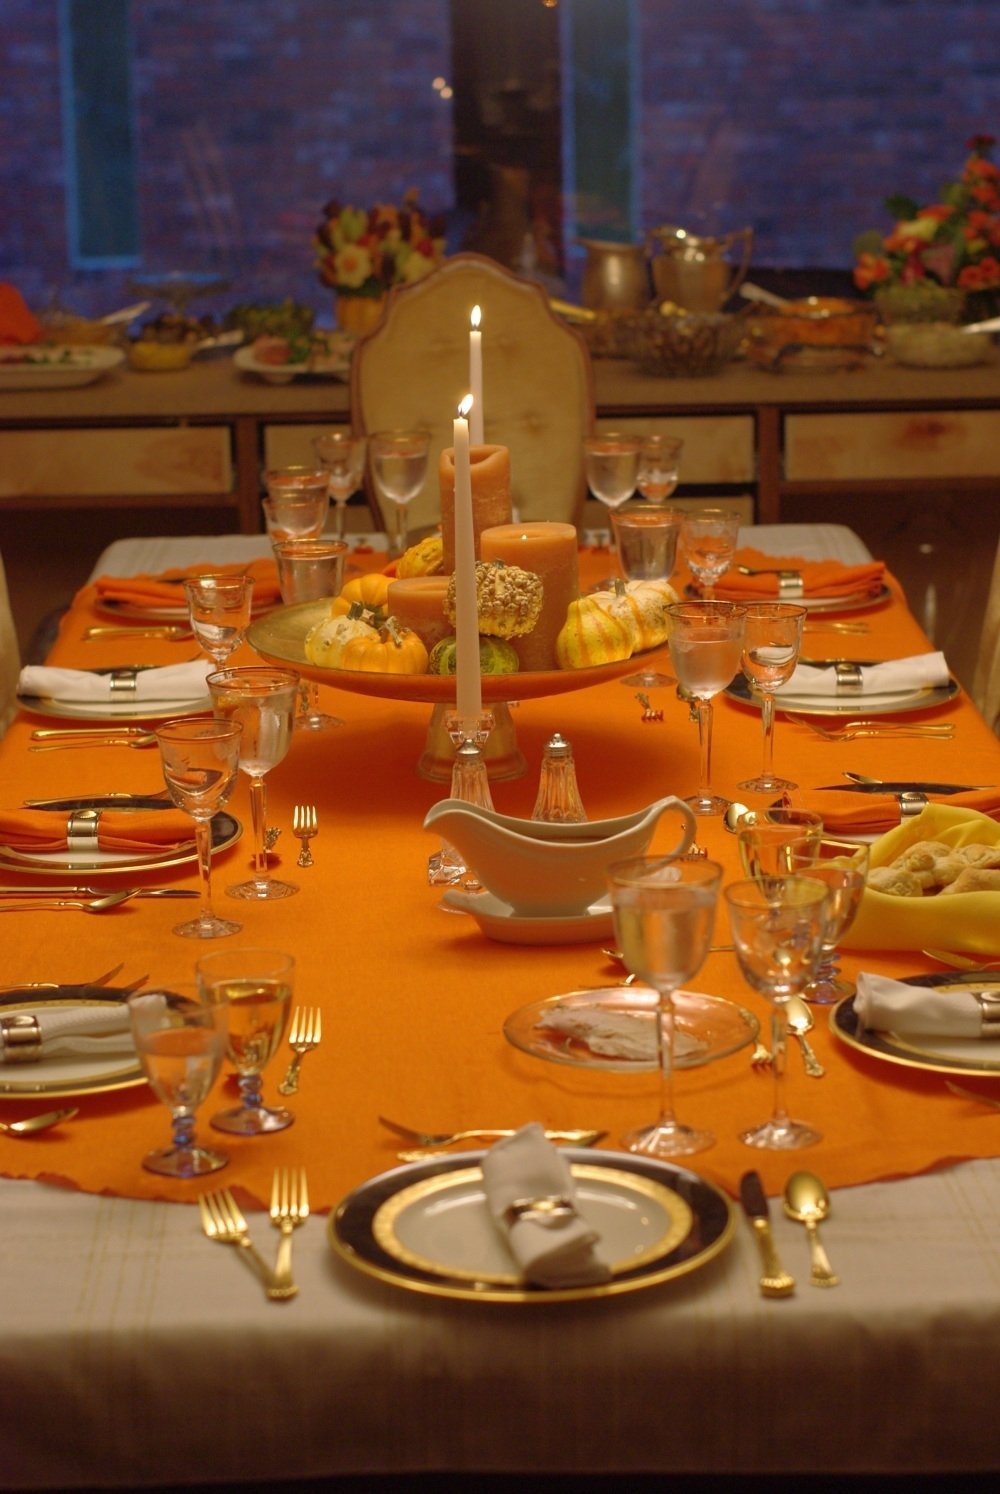 10 Spectacular Decorating Ideas For Thanksgiving Table pictures of dining tables decorated table decorating ideas 1 2022